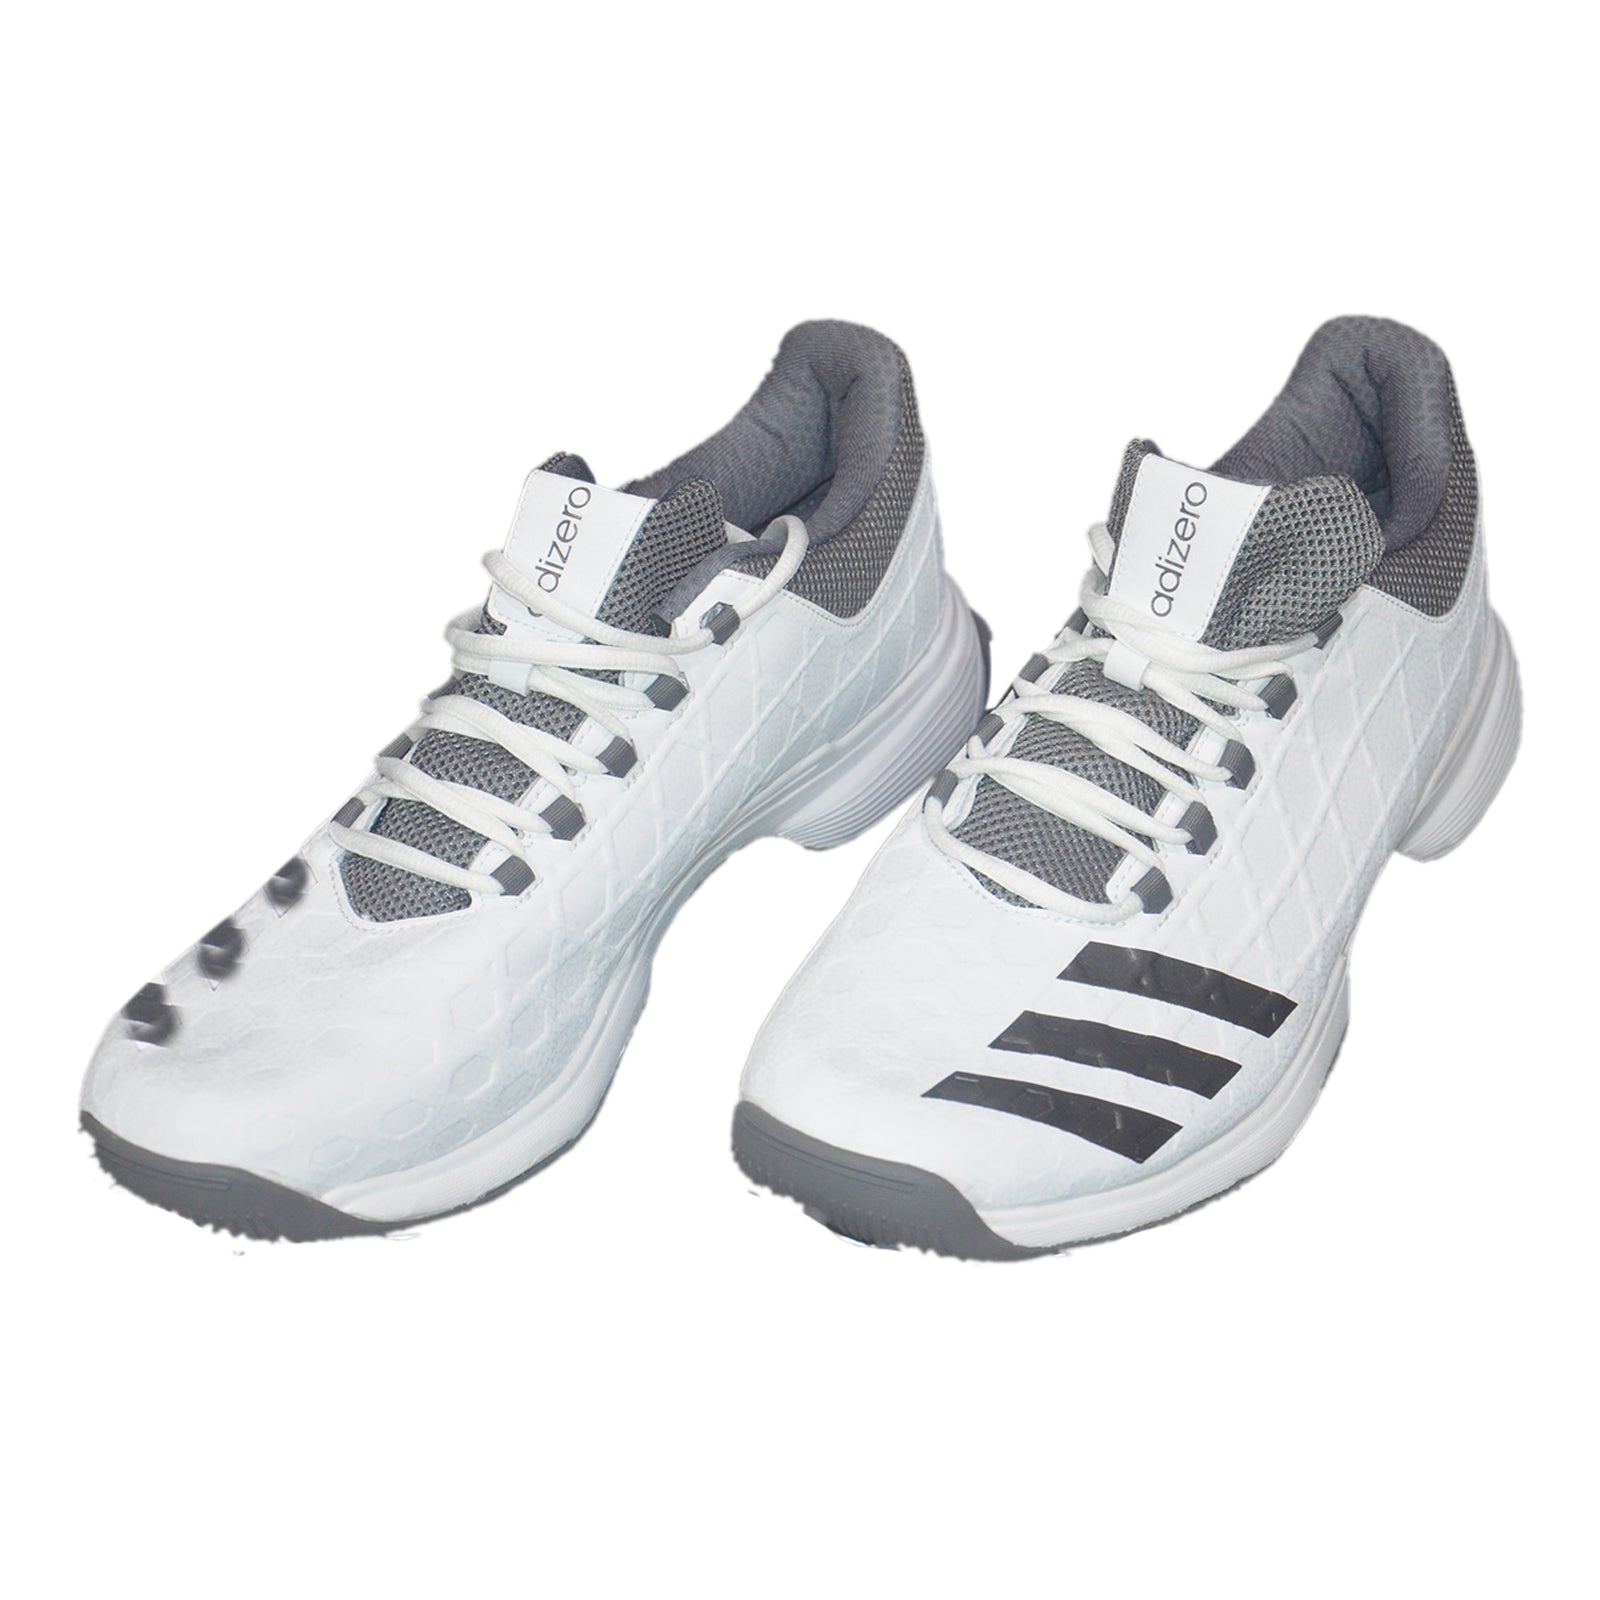 SL22 Steel Spikes Cricket Shoes Sturdy Sports